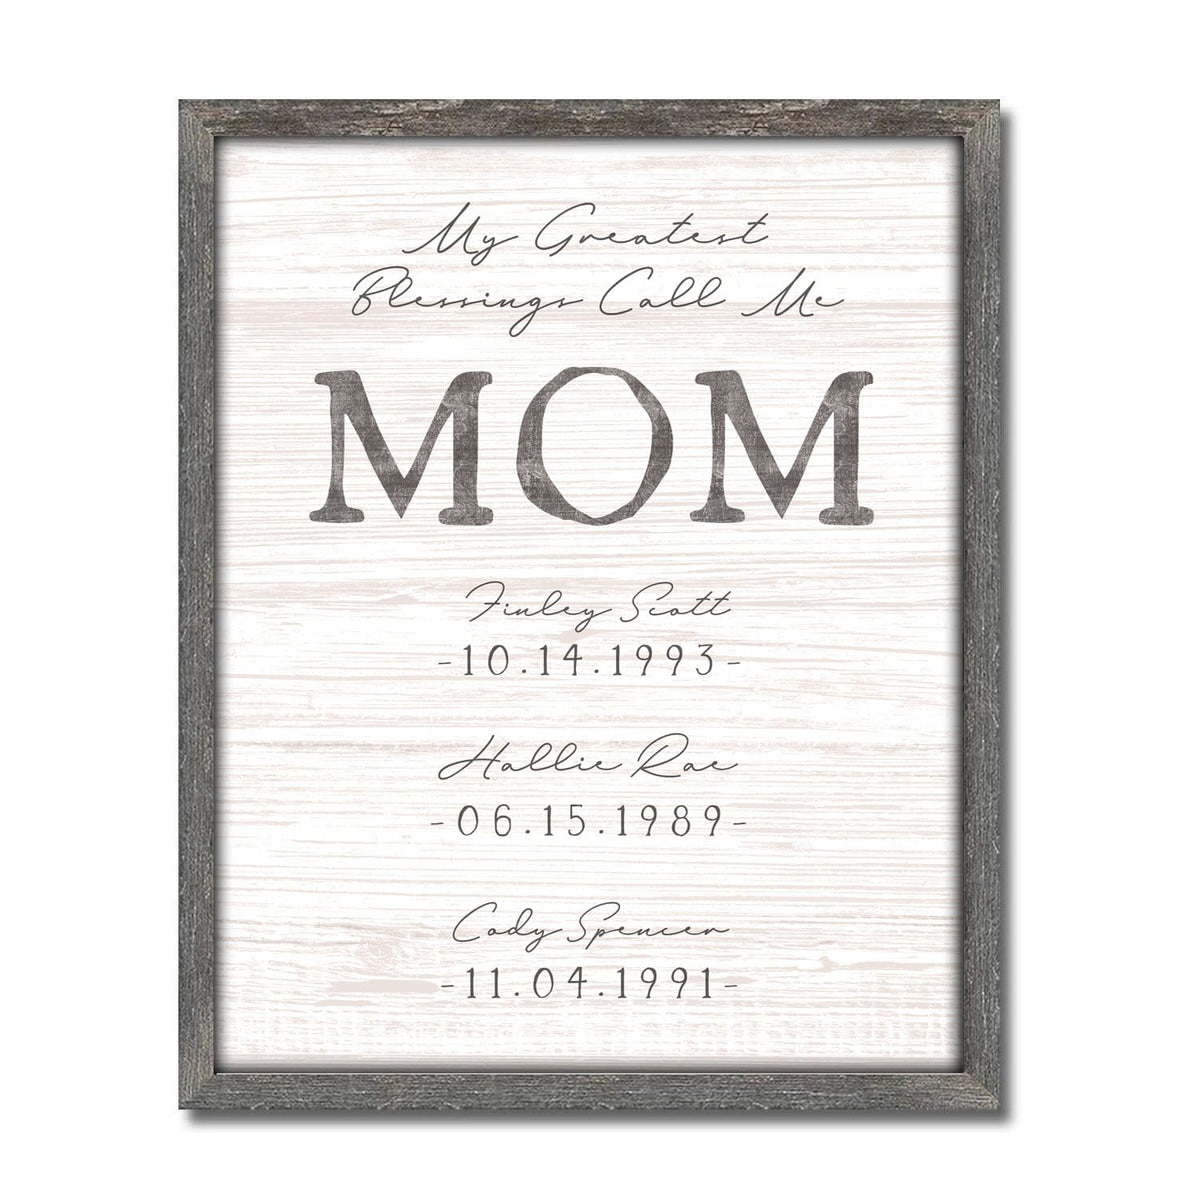 Greatest Blessings Call Me MOM personalized art Framed canvas